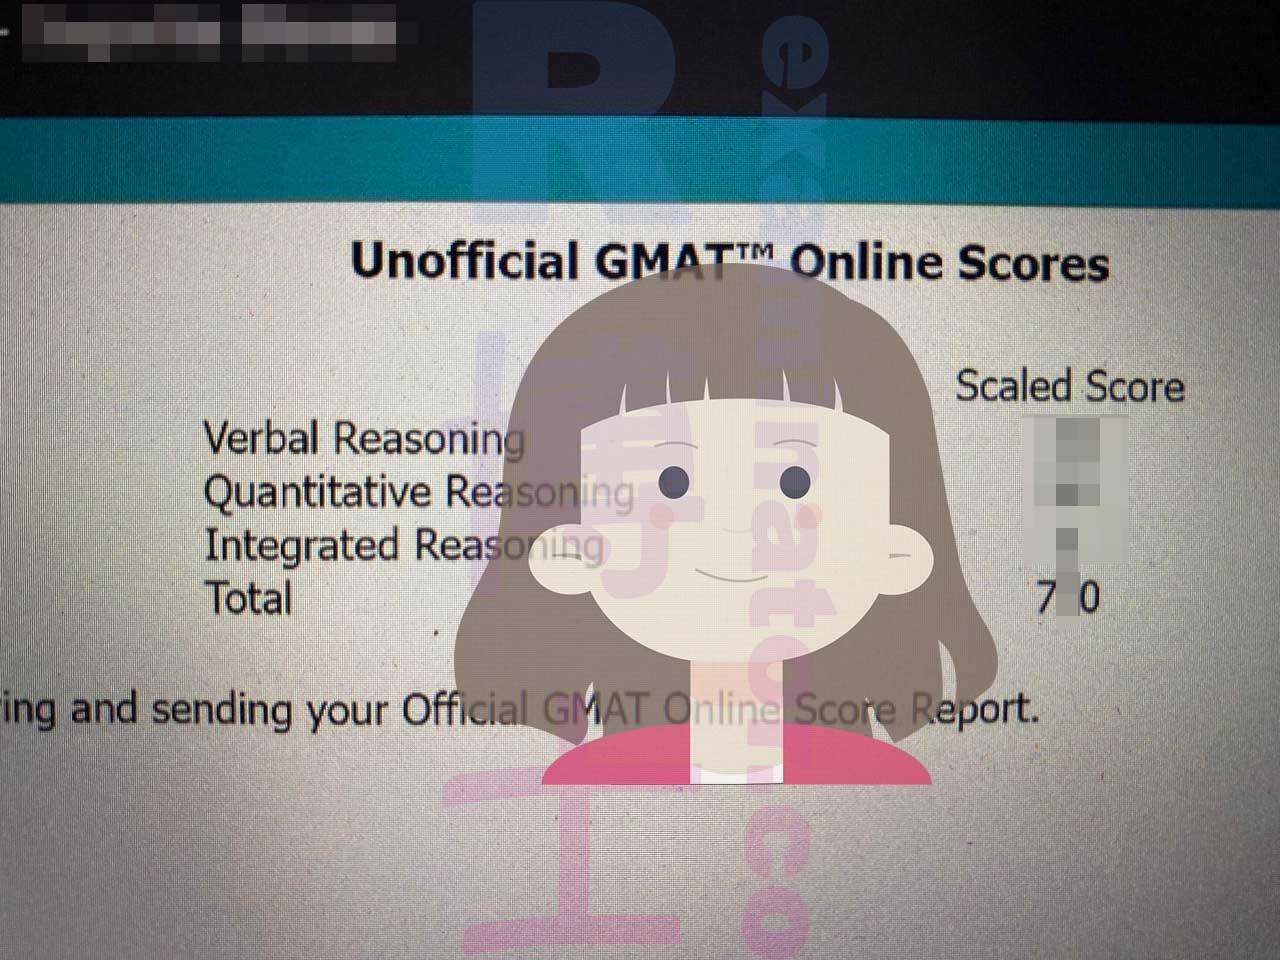 score image for GMAT Cheating success story #487